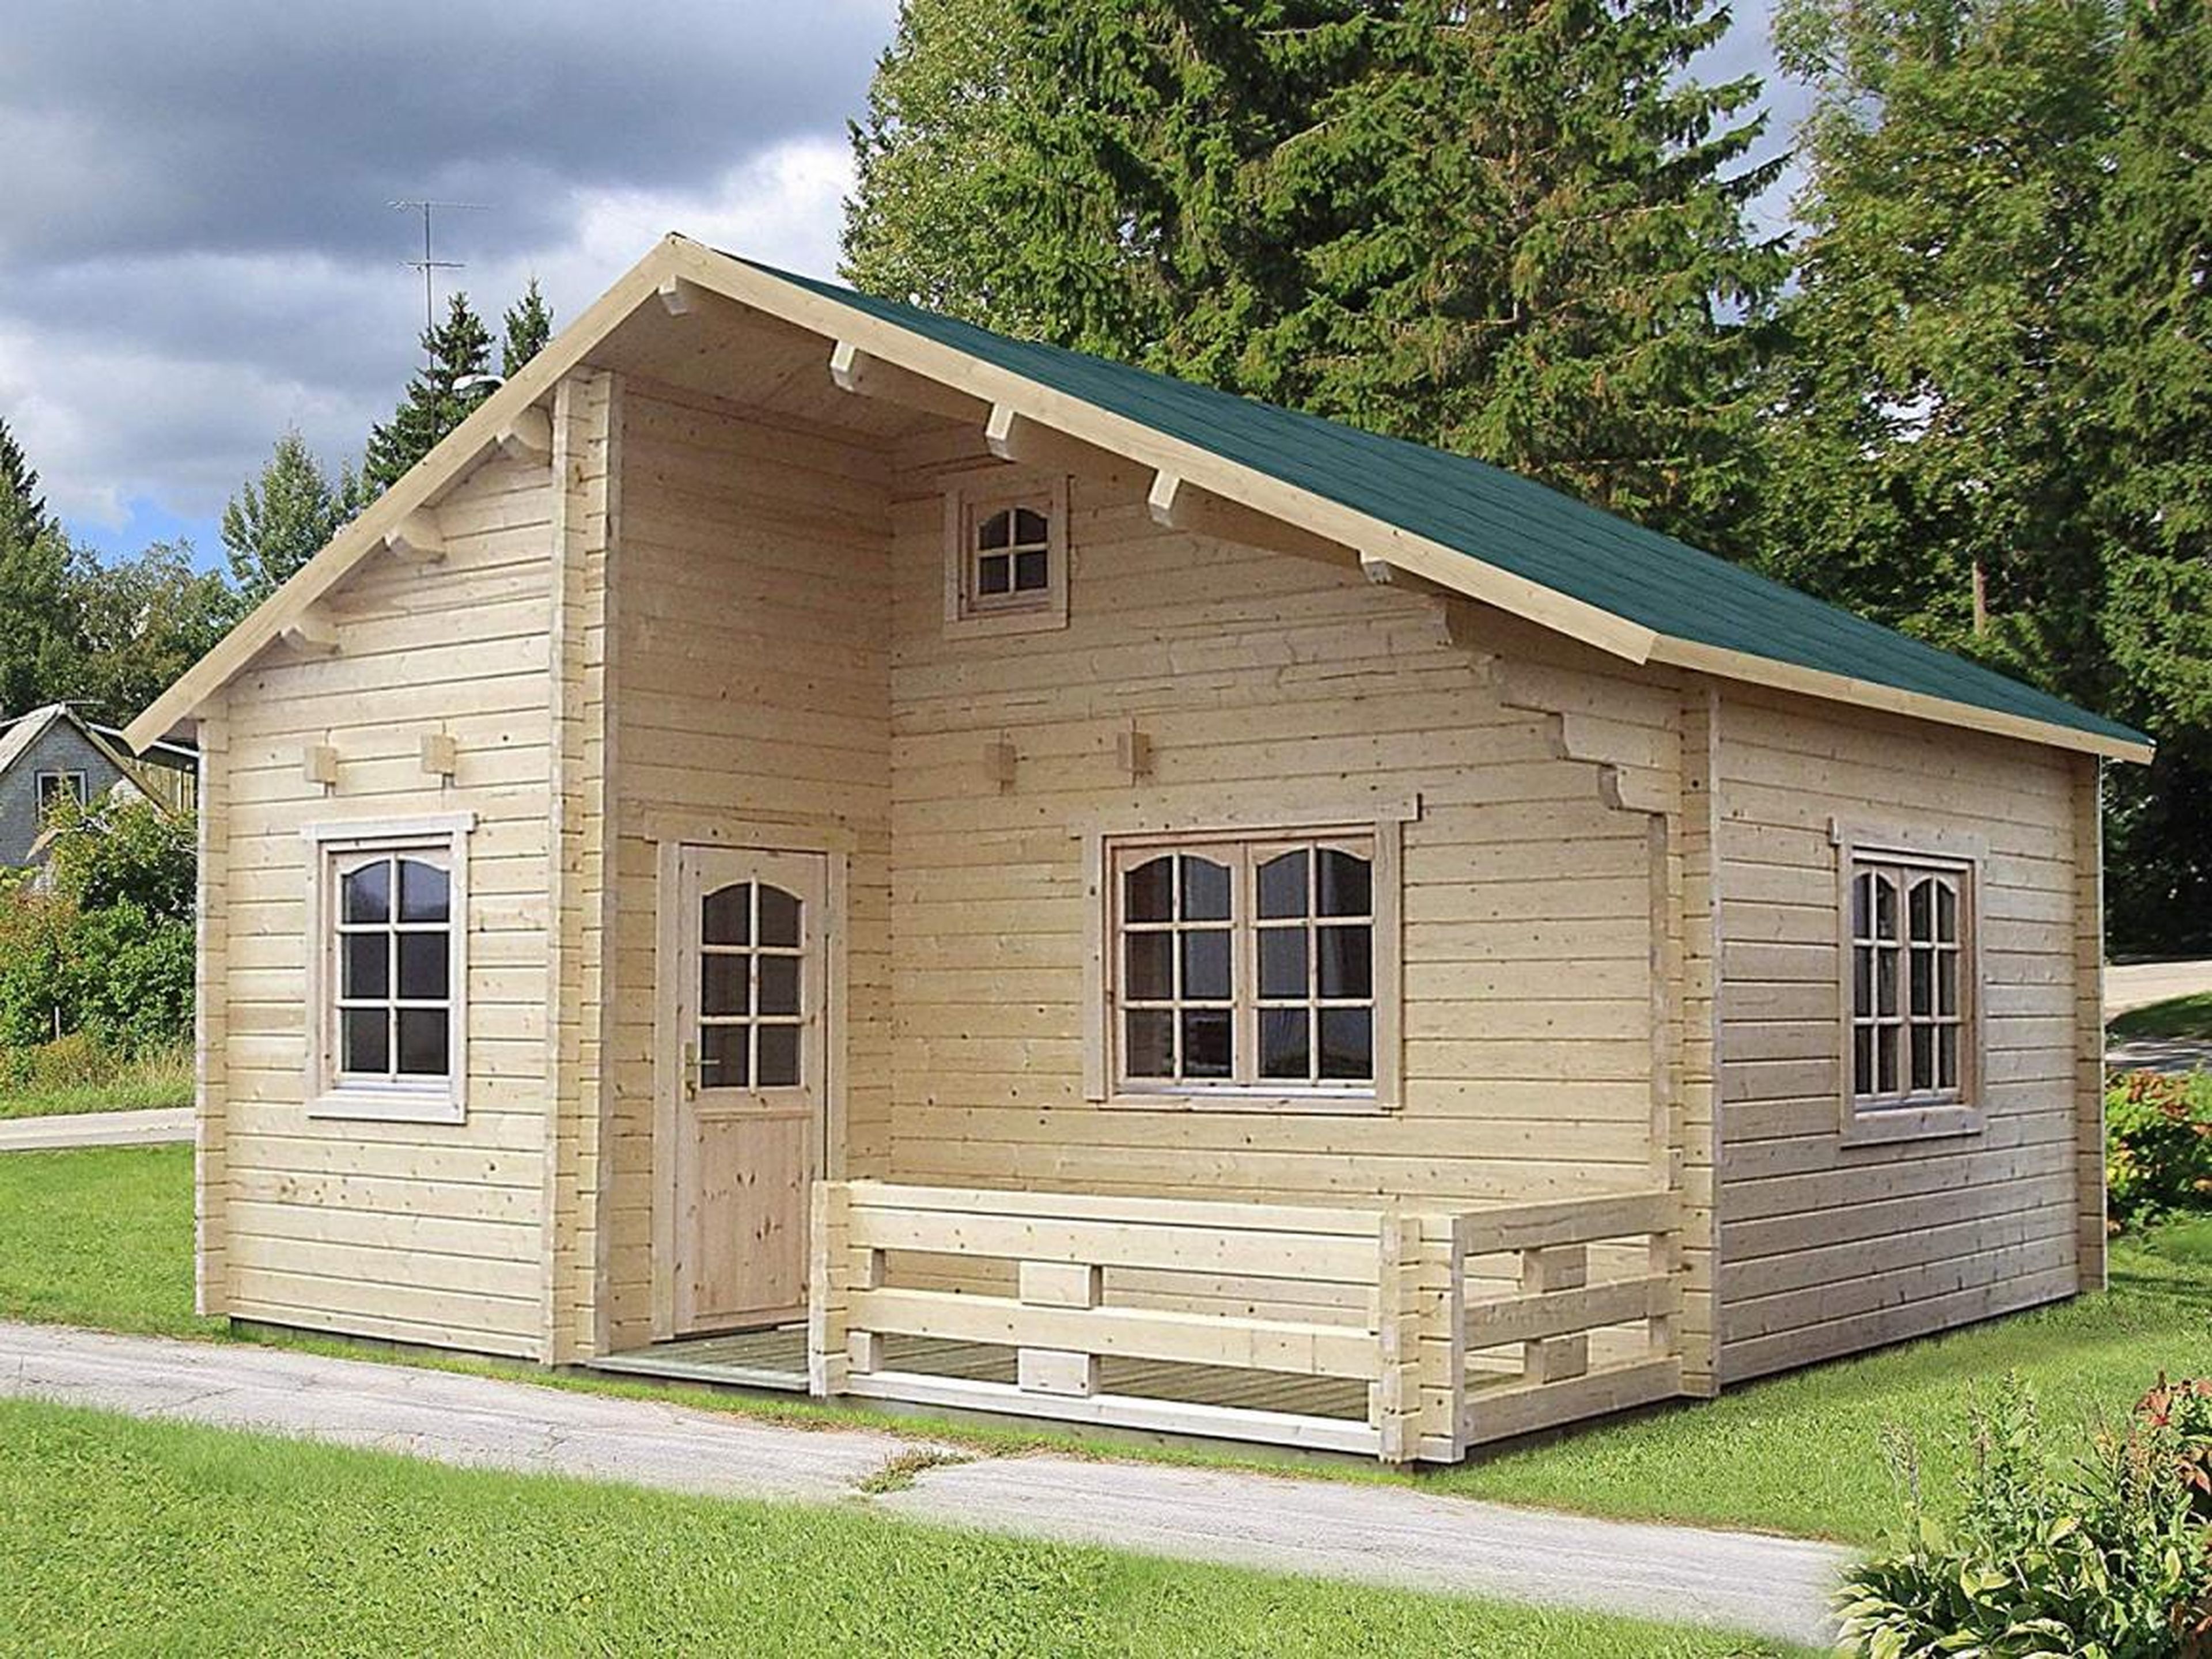 There's no hard-and-fast rule for what qualifies as a "tiny" home, but they are usually under 500 square feet. They're cheaper options for people who can't afford bigger houses or are simply looking to live the tiny-home lifestyle